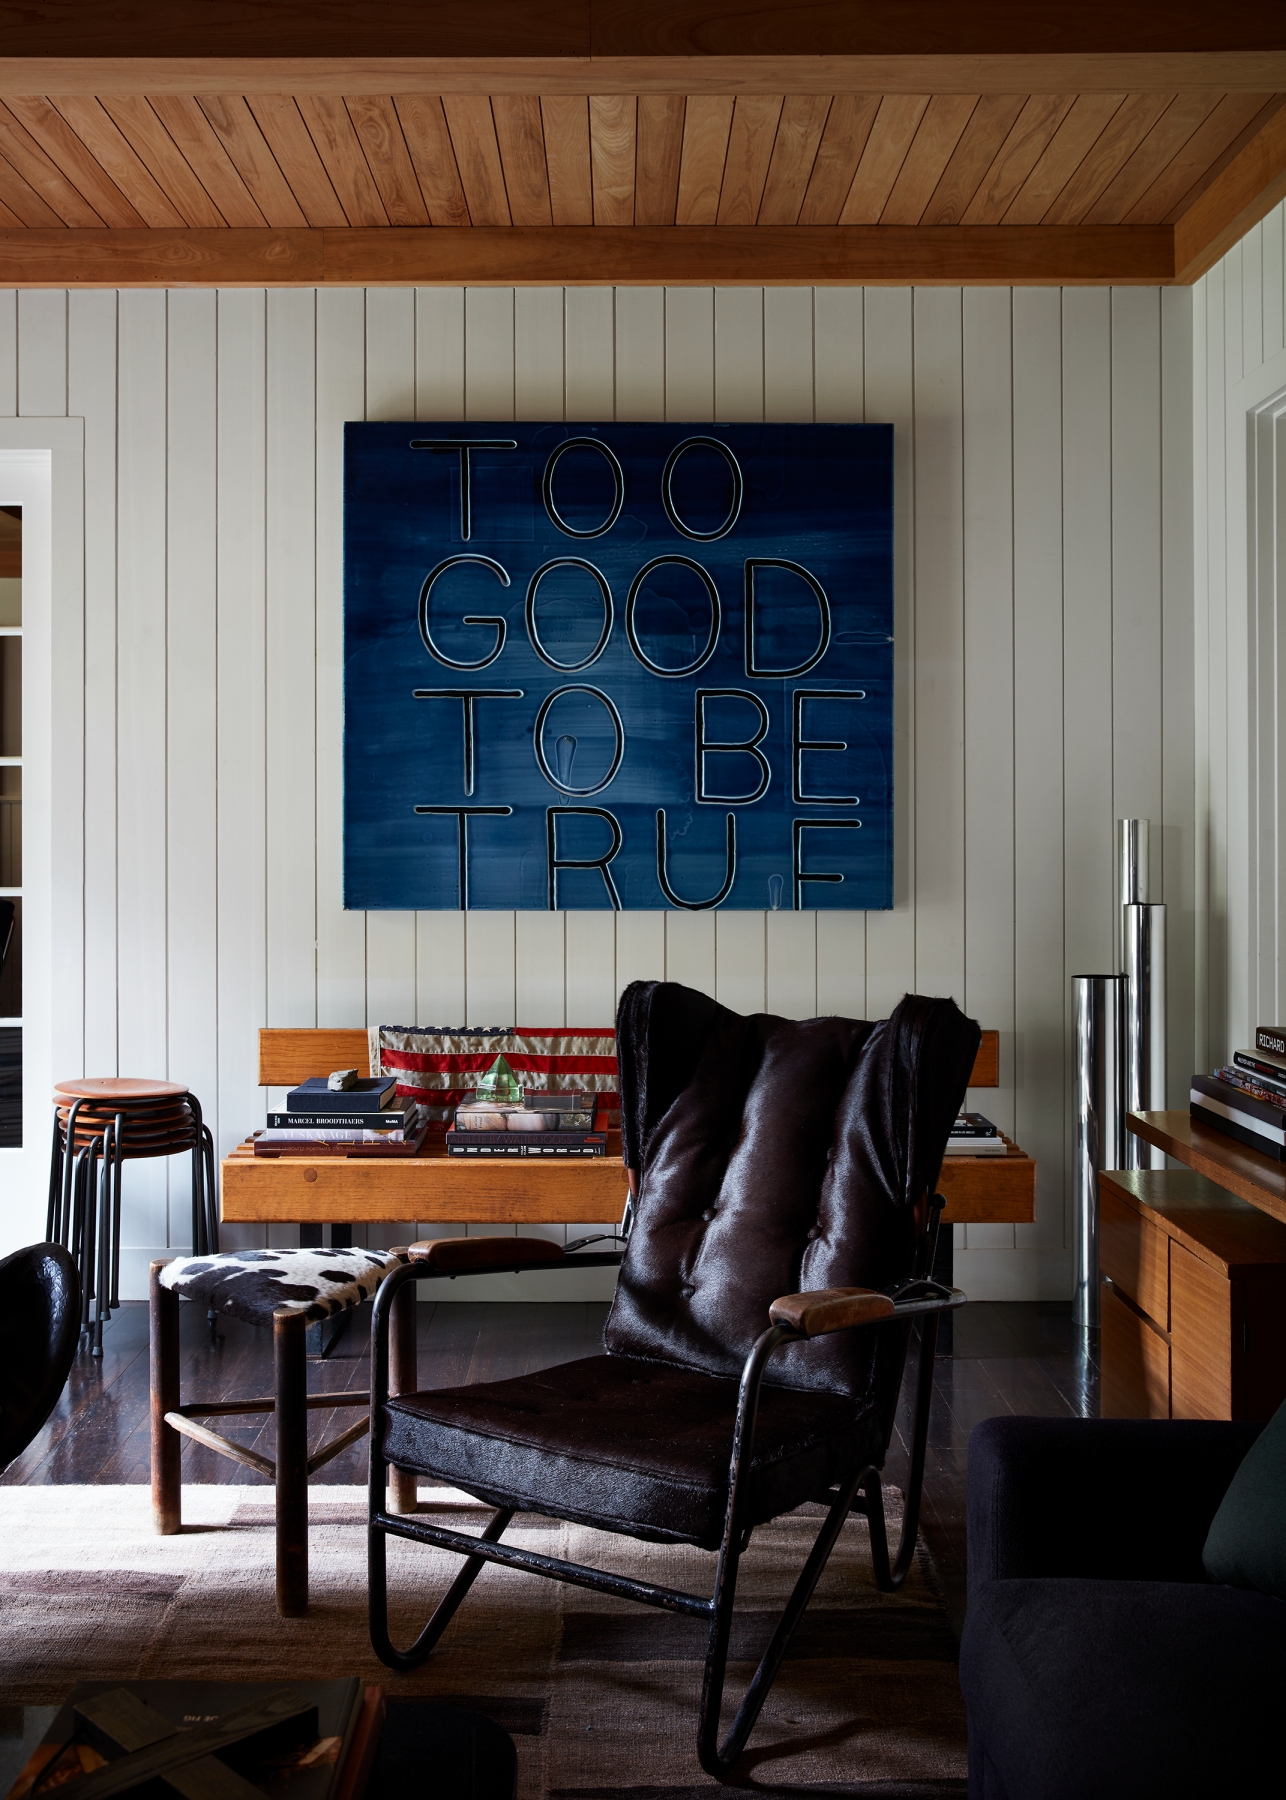 Perfecto chair by Pierre Guariche in Robert's Stilin apartment, Image by Stephen Kent Johnson